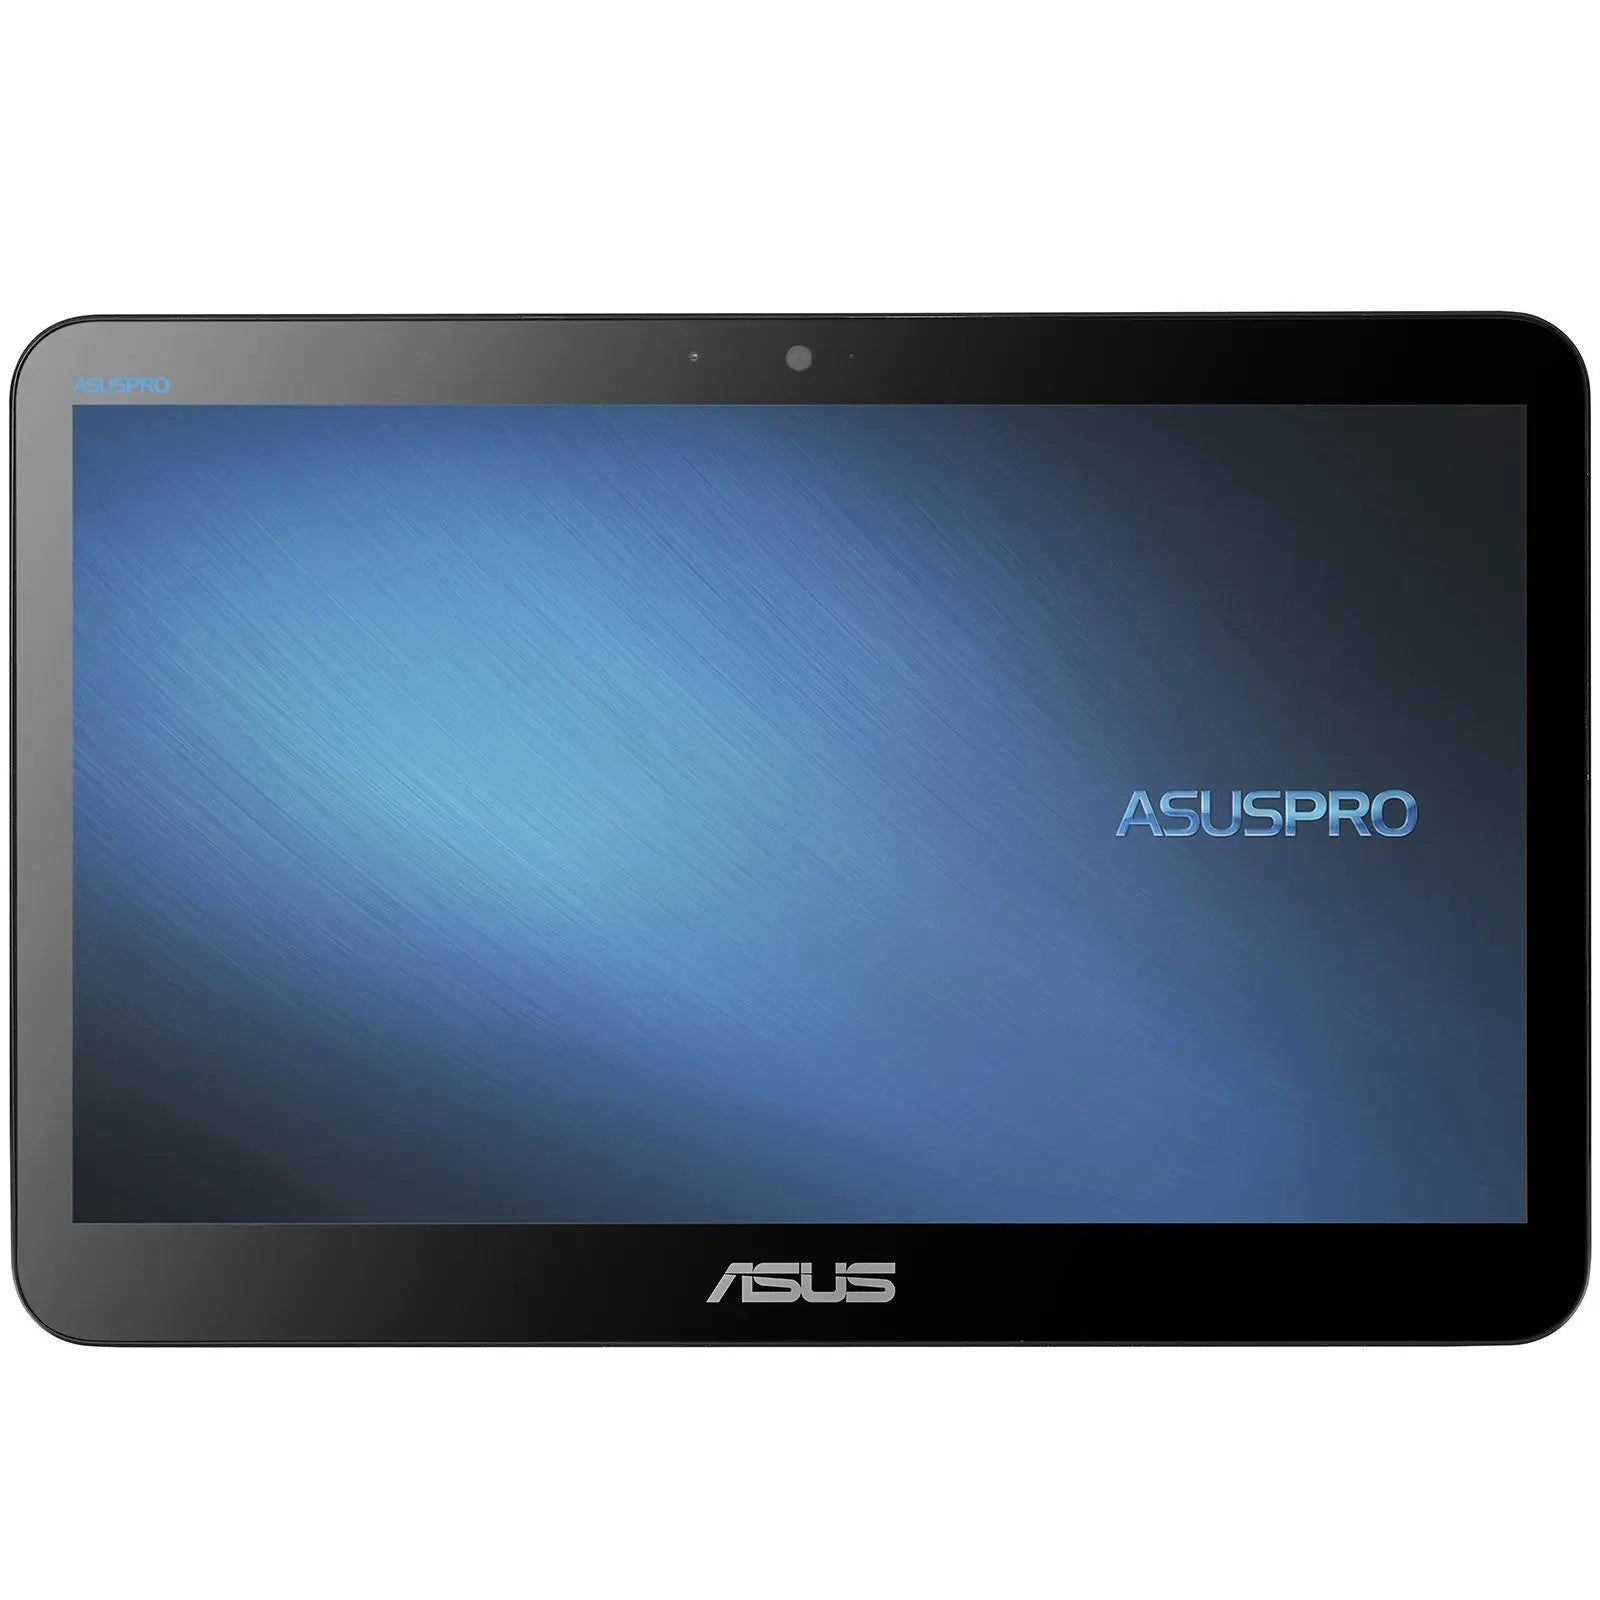 ASUS All-in-One PC A4110 - Celeron J3160 1.6 GHz - 4 Go - 128 Go - LED 15.6"  4712900552782 ASUS